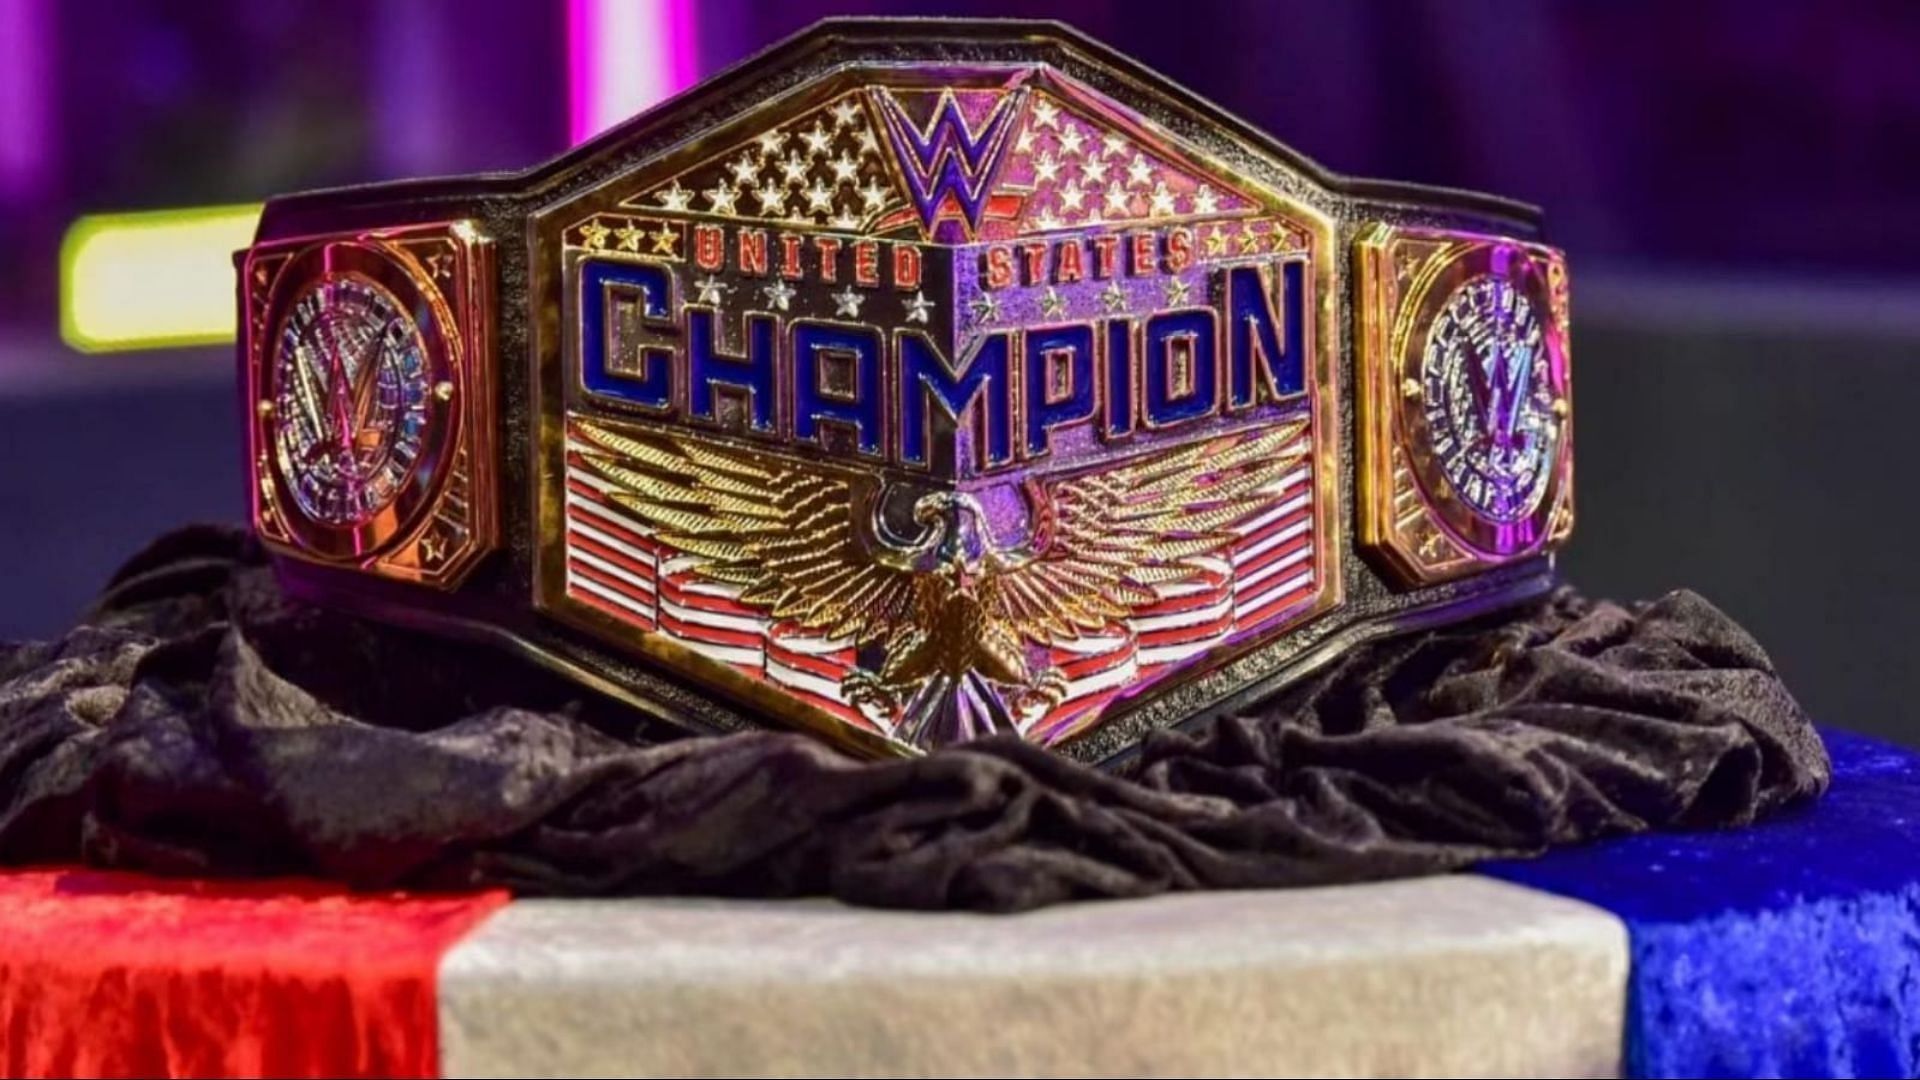 Austin Theory is the current WWE United States Champion.